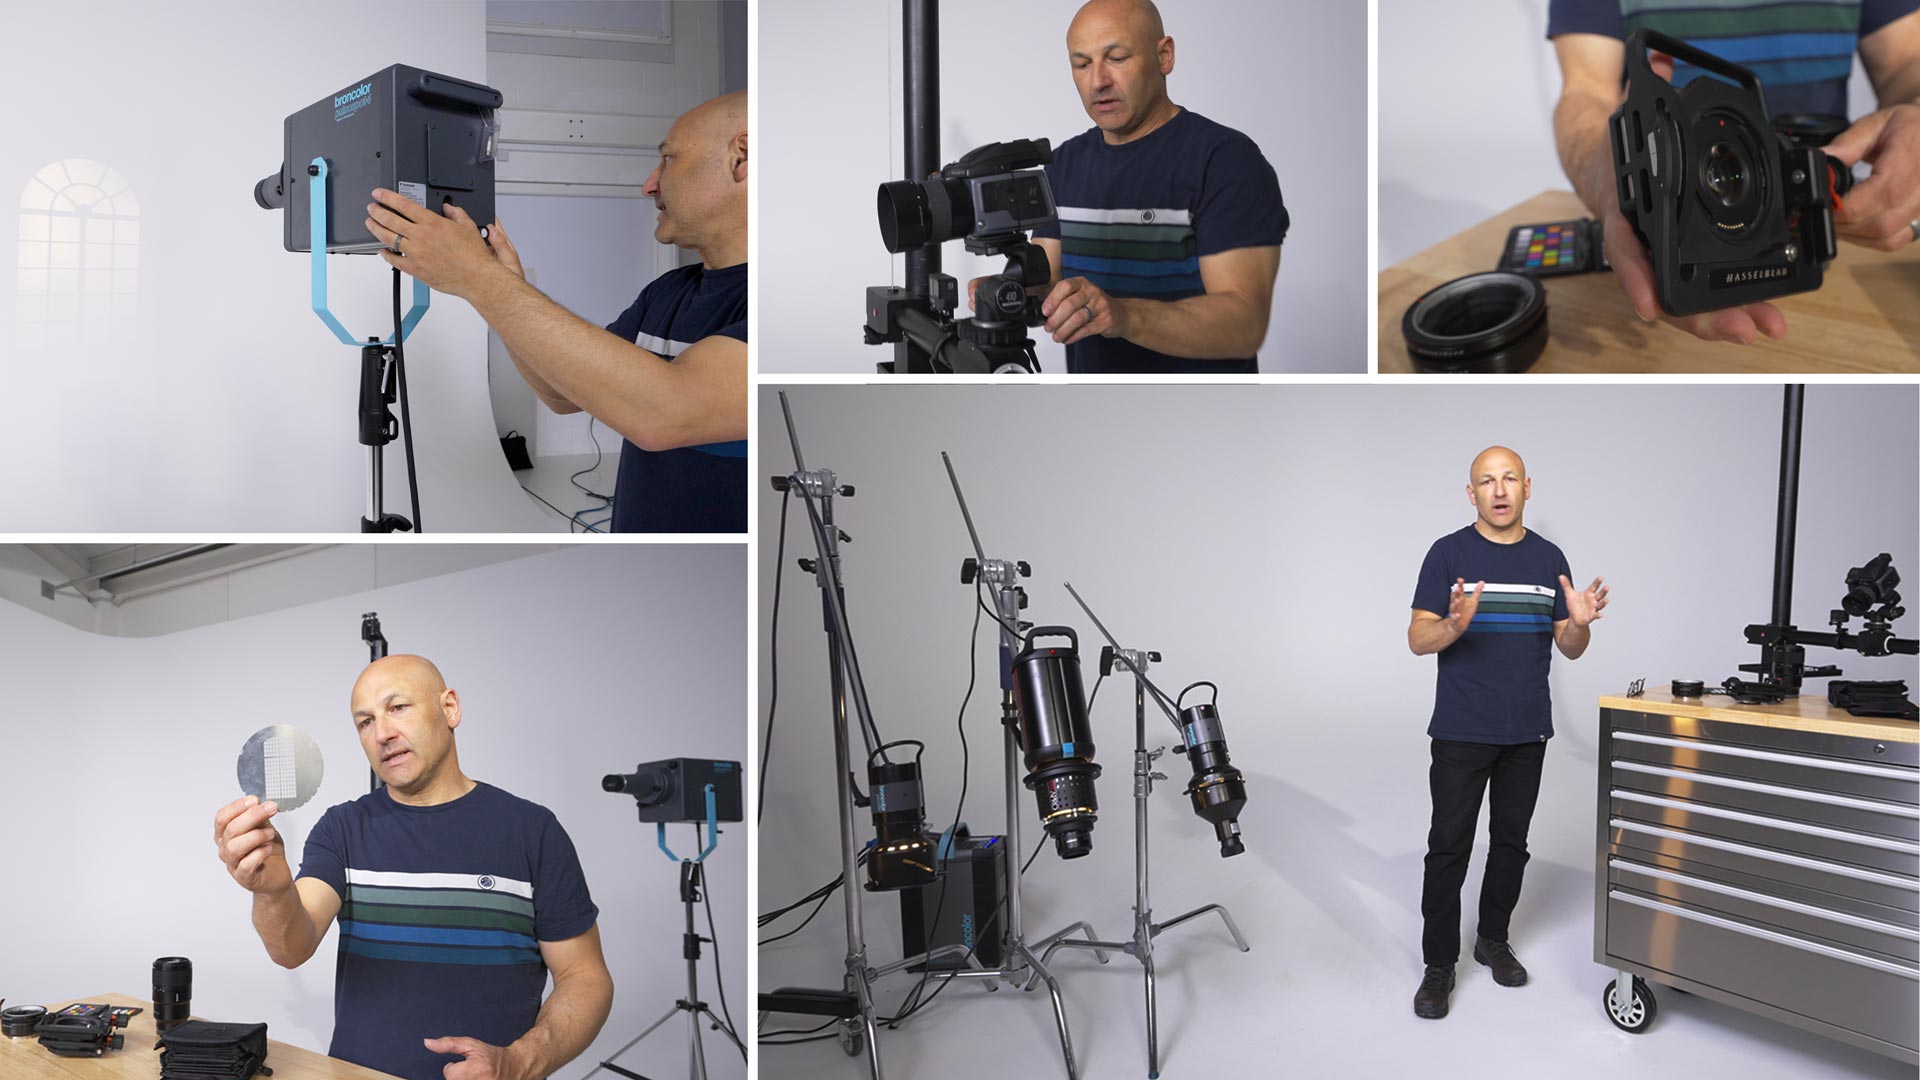 Advanced Studio Kit for Product Photography